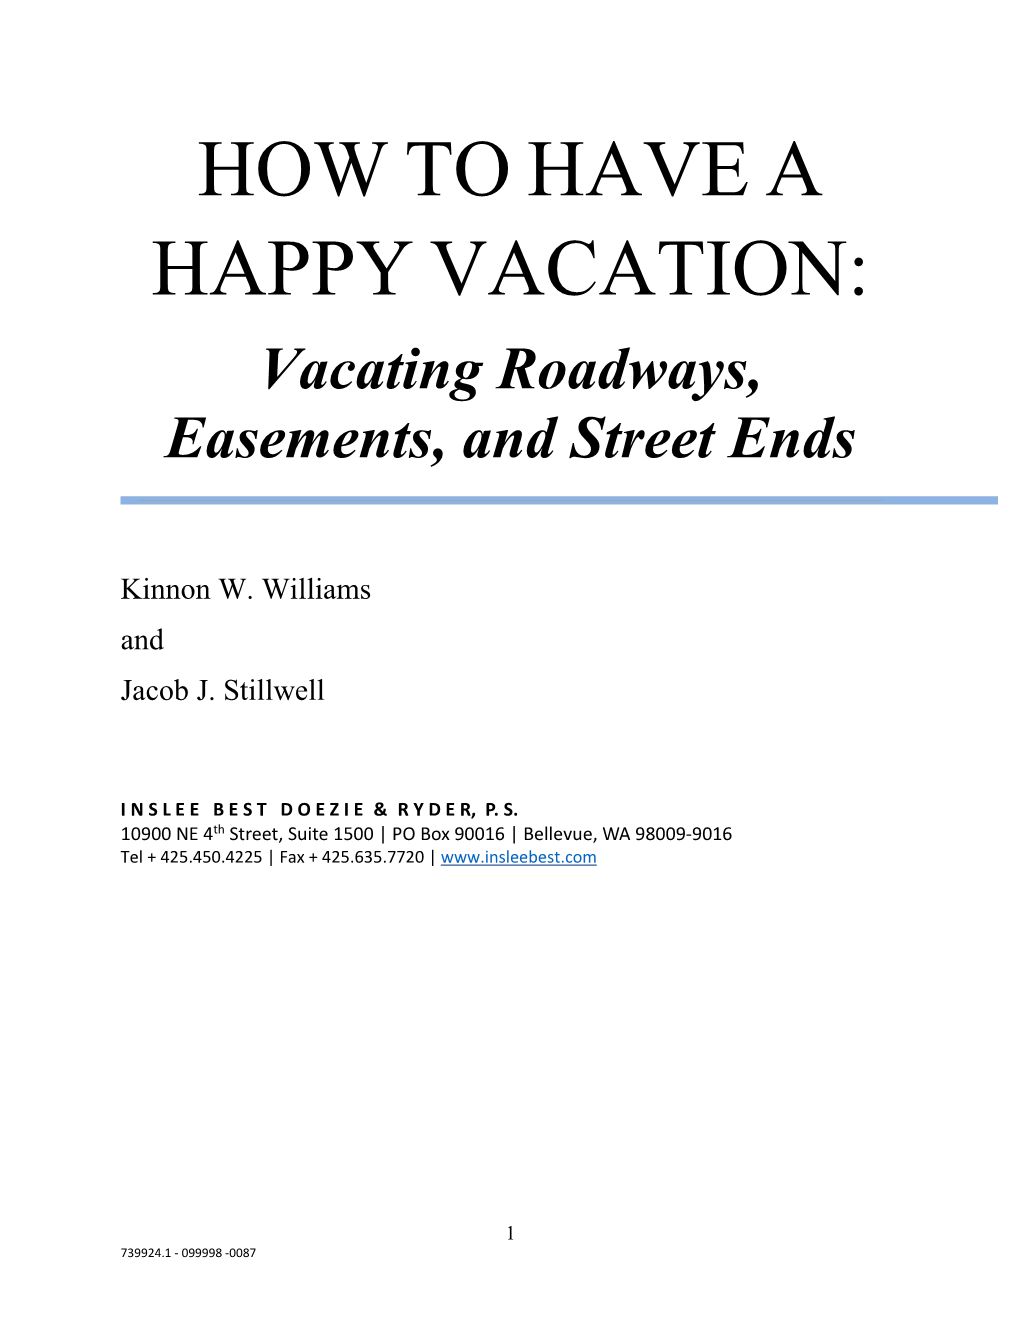 HOW to HAVE a HAPPY VACATION: Vacating Roadways, Easements, and Street Ends